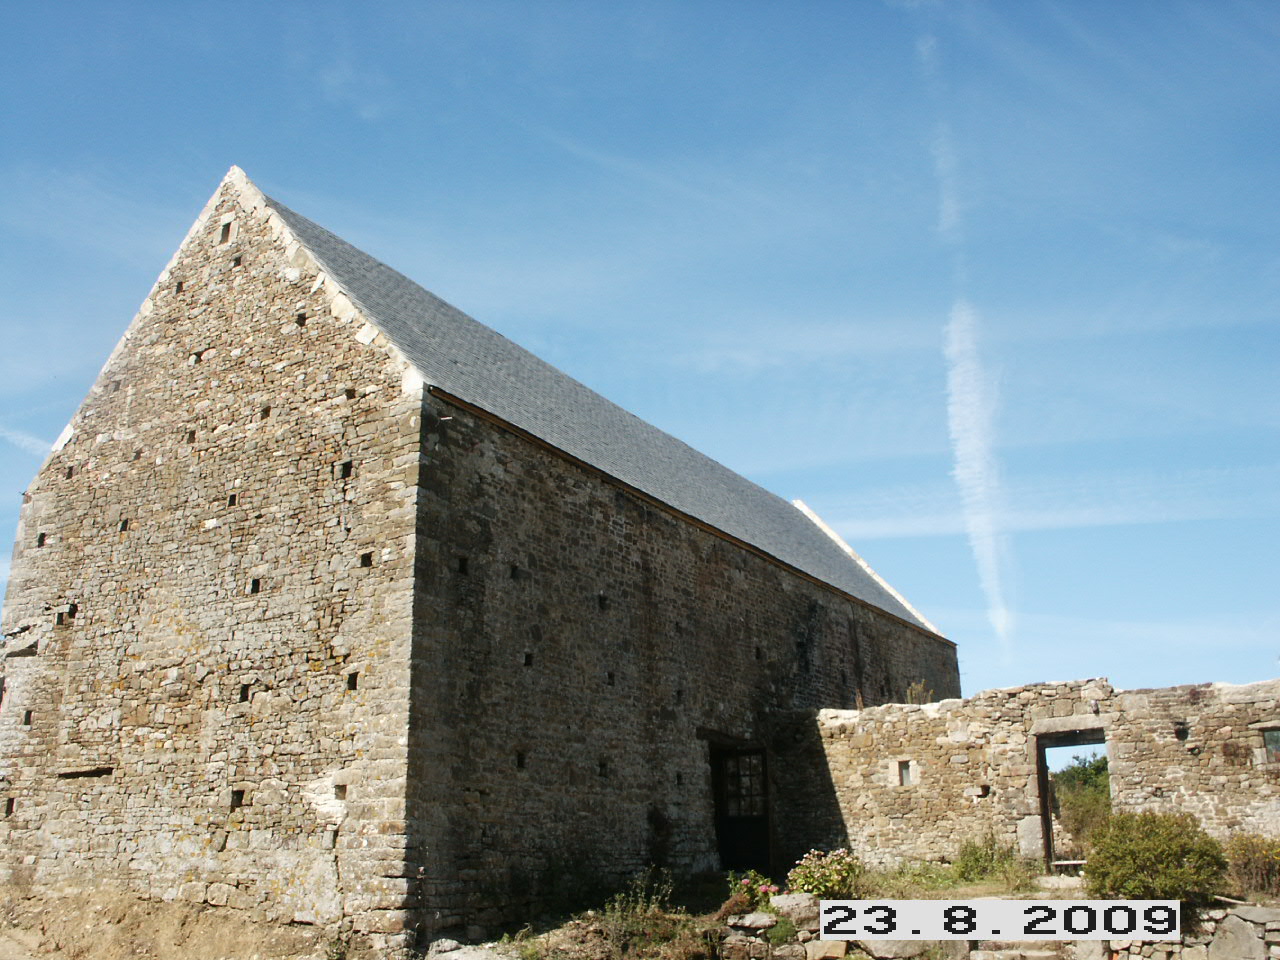 The rebuilt of the barn in 2009.